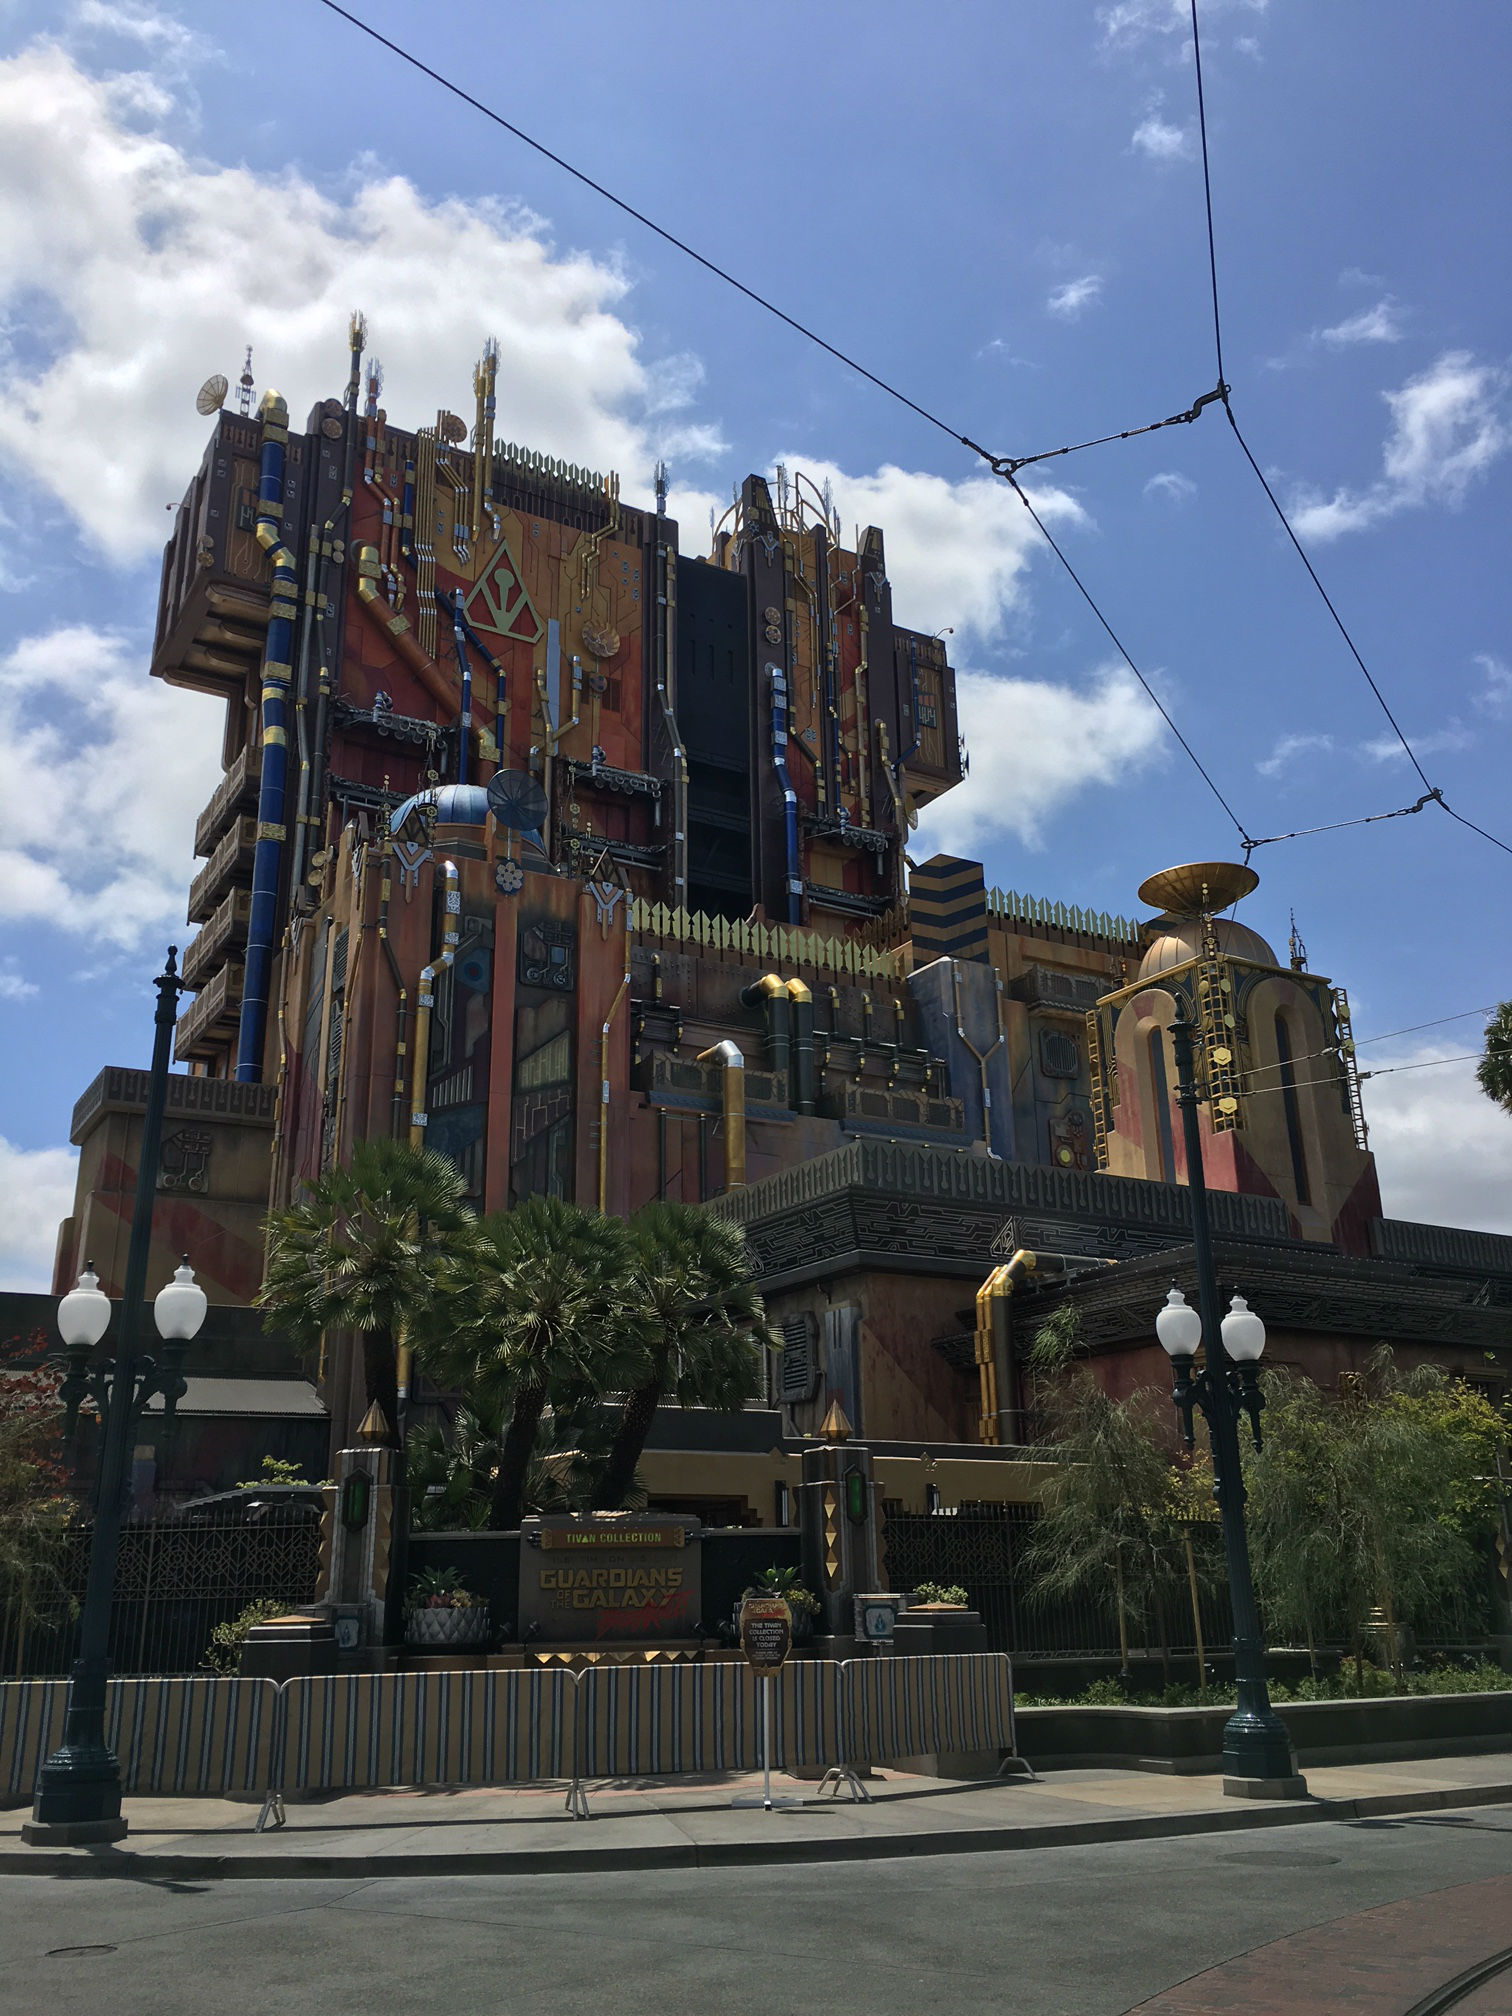 The New Guardians Of The Galaxy Ride Exists In Its Own Unique Marvel Universe 